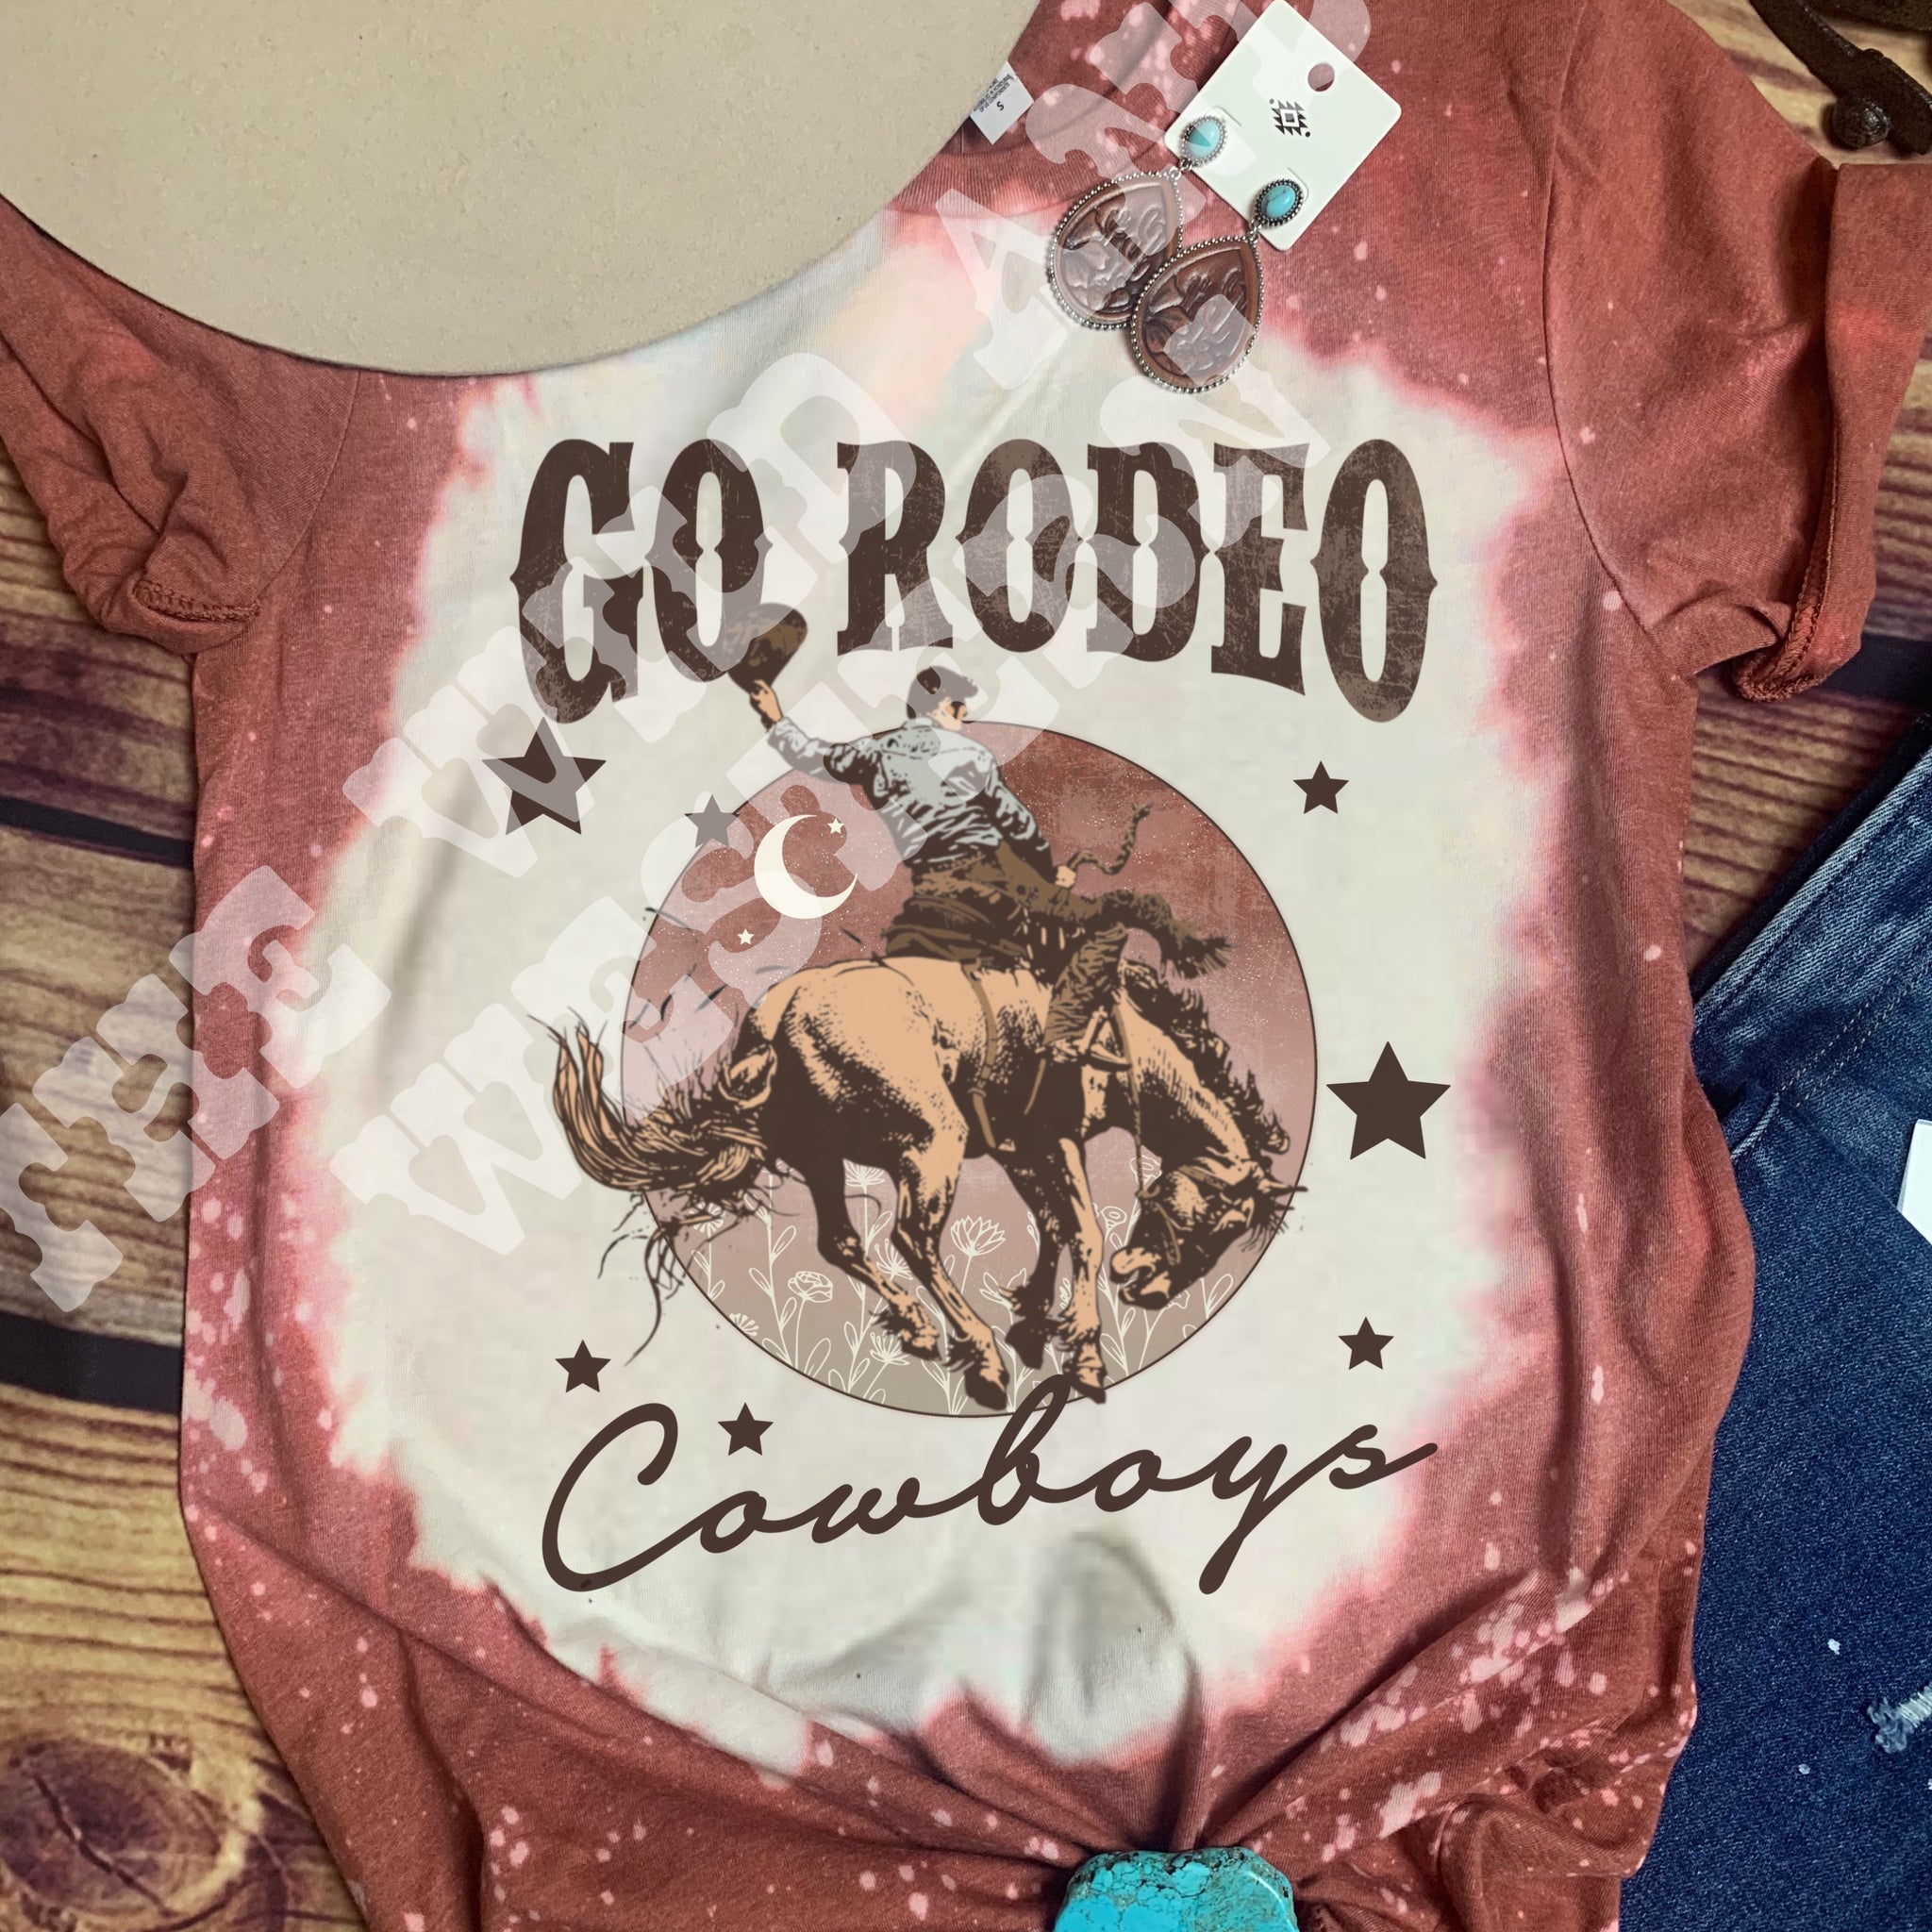 Go Rodeo Cowboys Bleached Tee